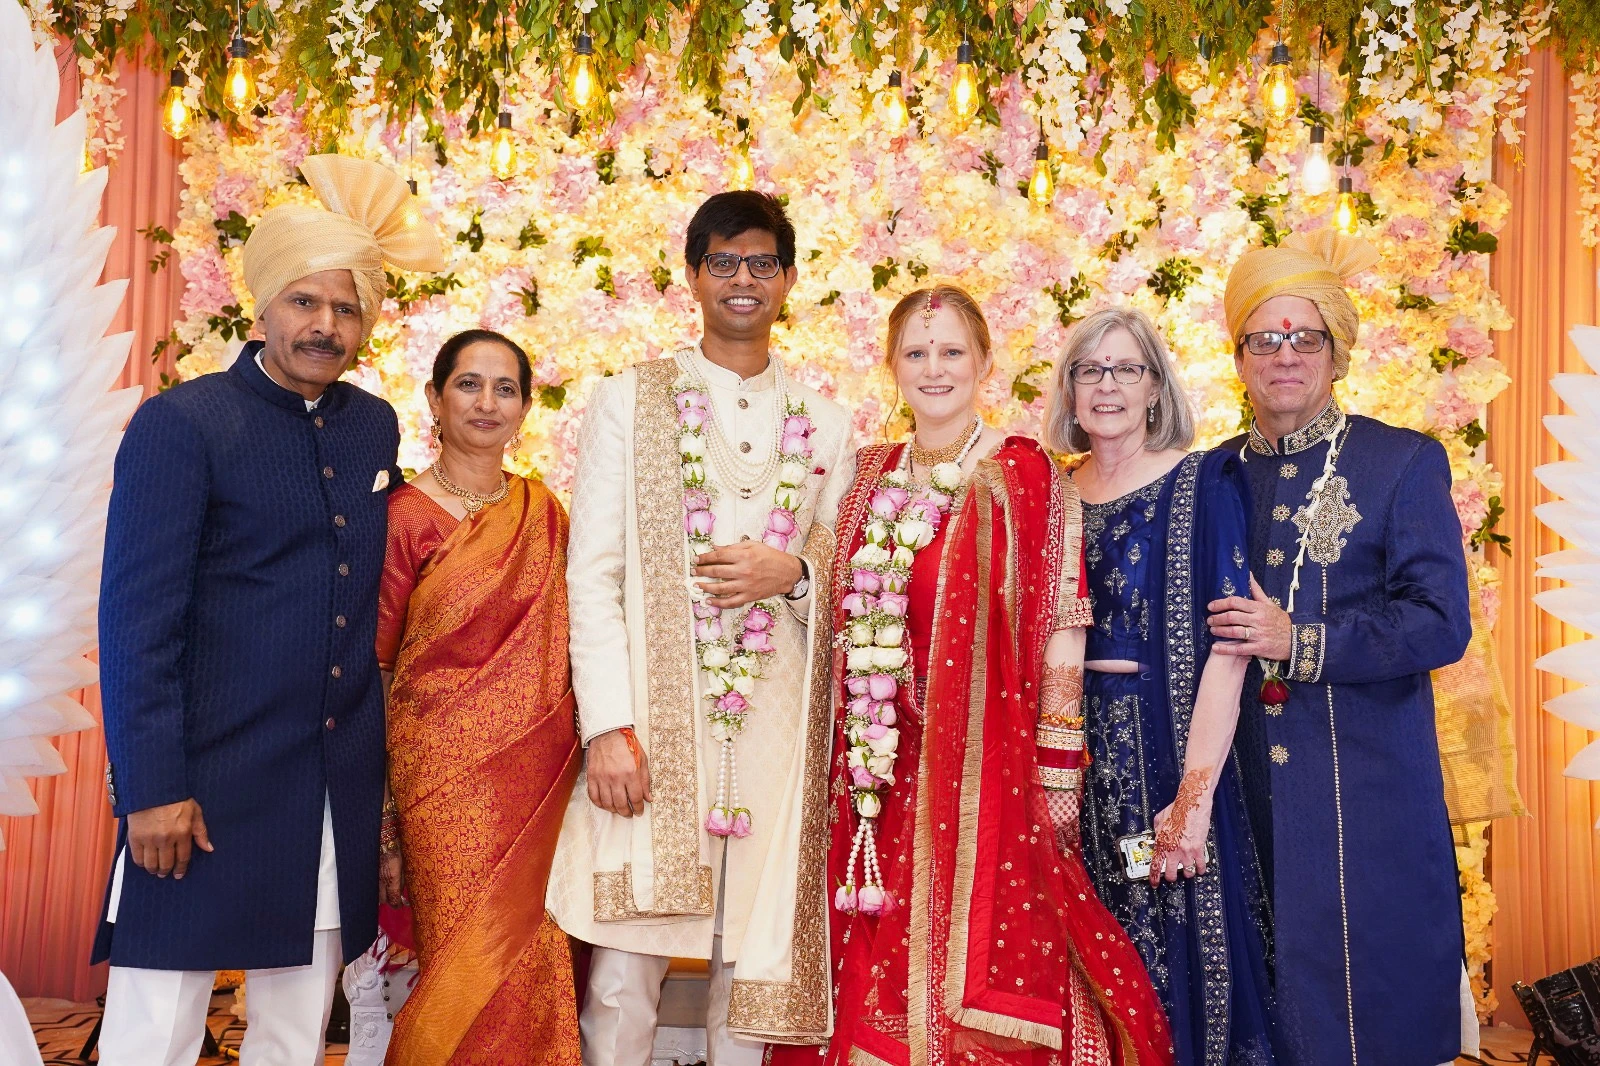 Rahul and I with our parents in traditional Indian wedding garb, in front of a wall full of flowers. I am wearing a bright red lehenga dress. Rahul is wearing a cream-colored suit called a sherwani. Rahul and I both have garlands of pink and yellow flowers around our necks.